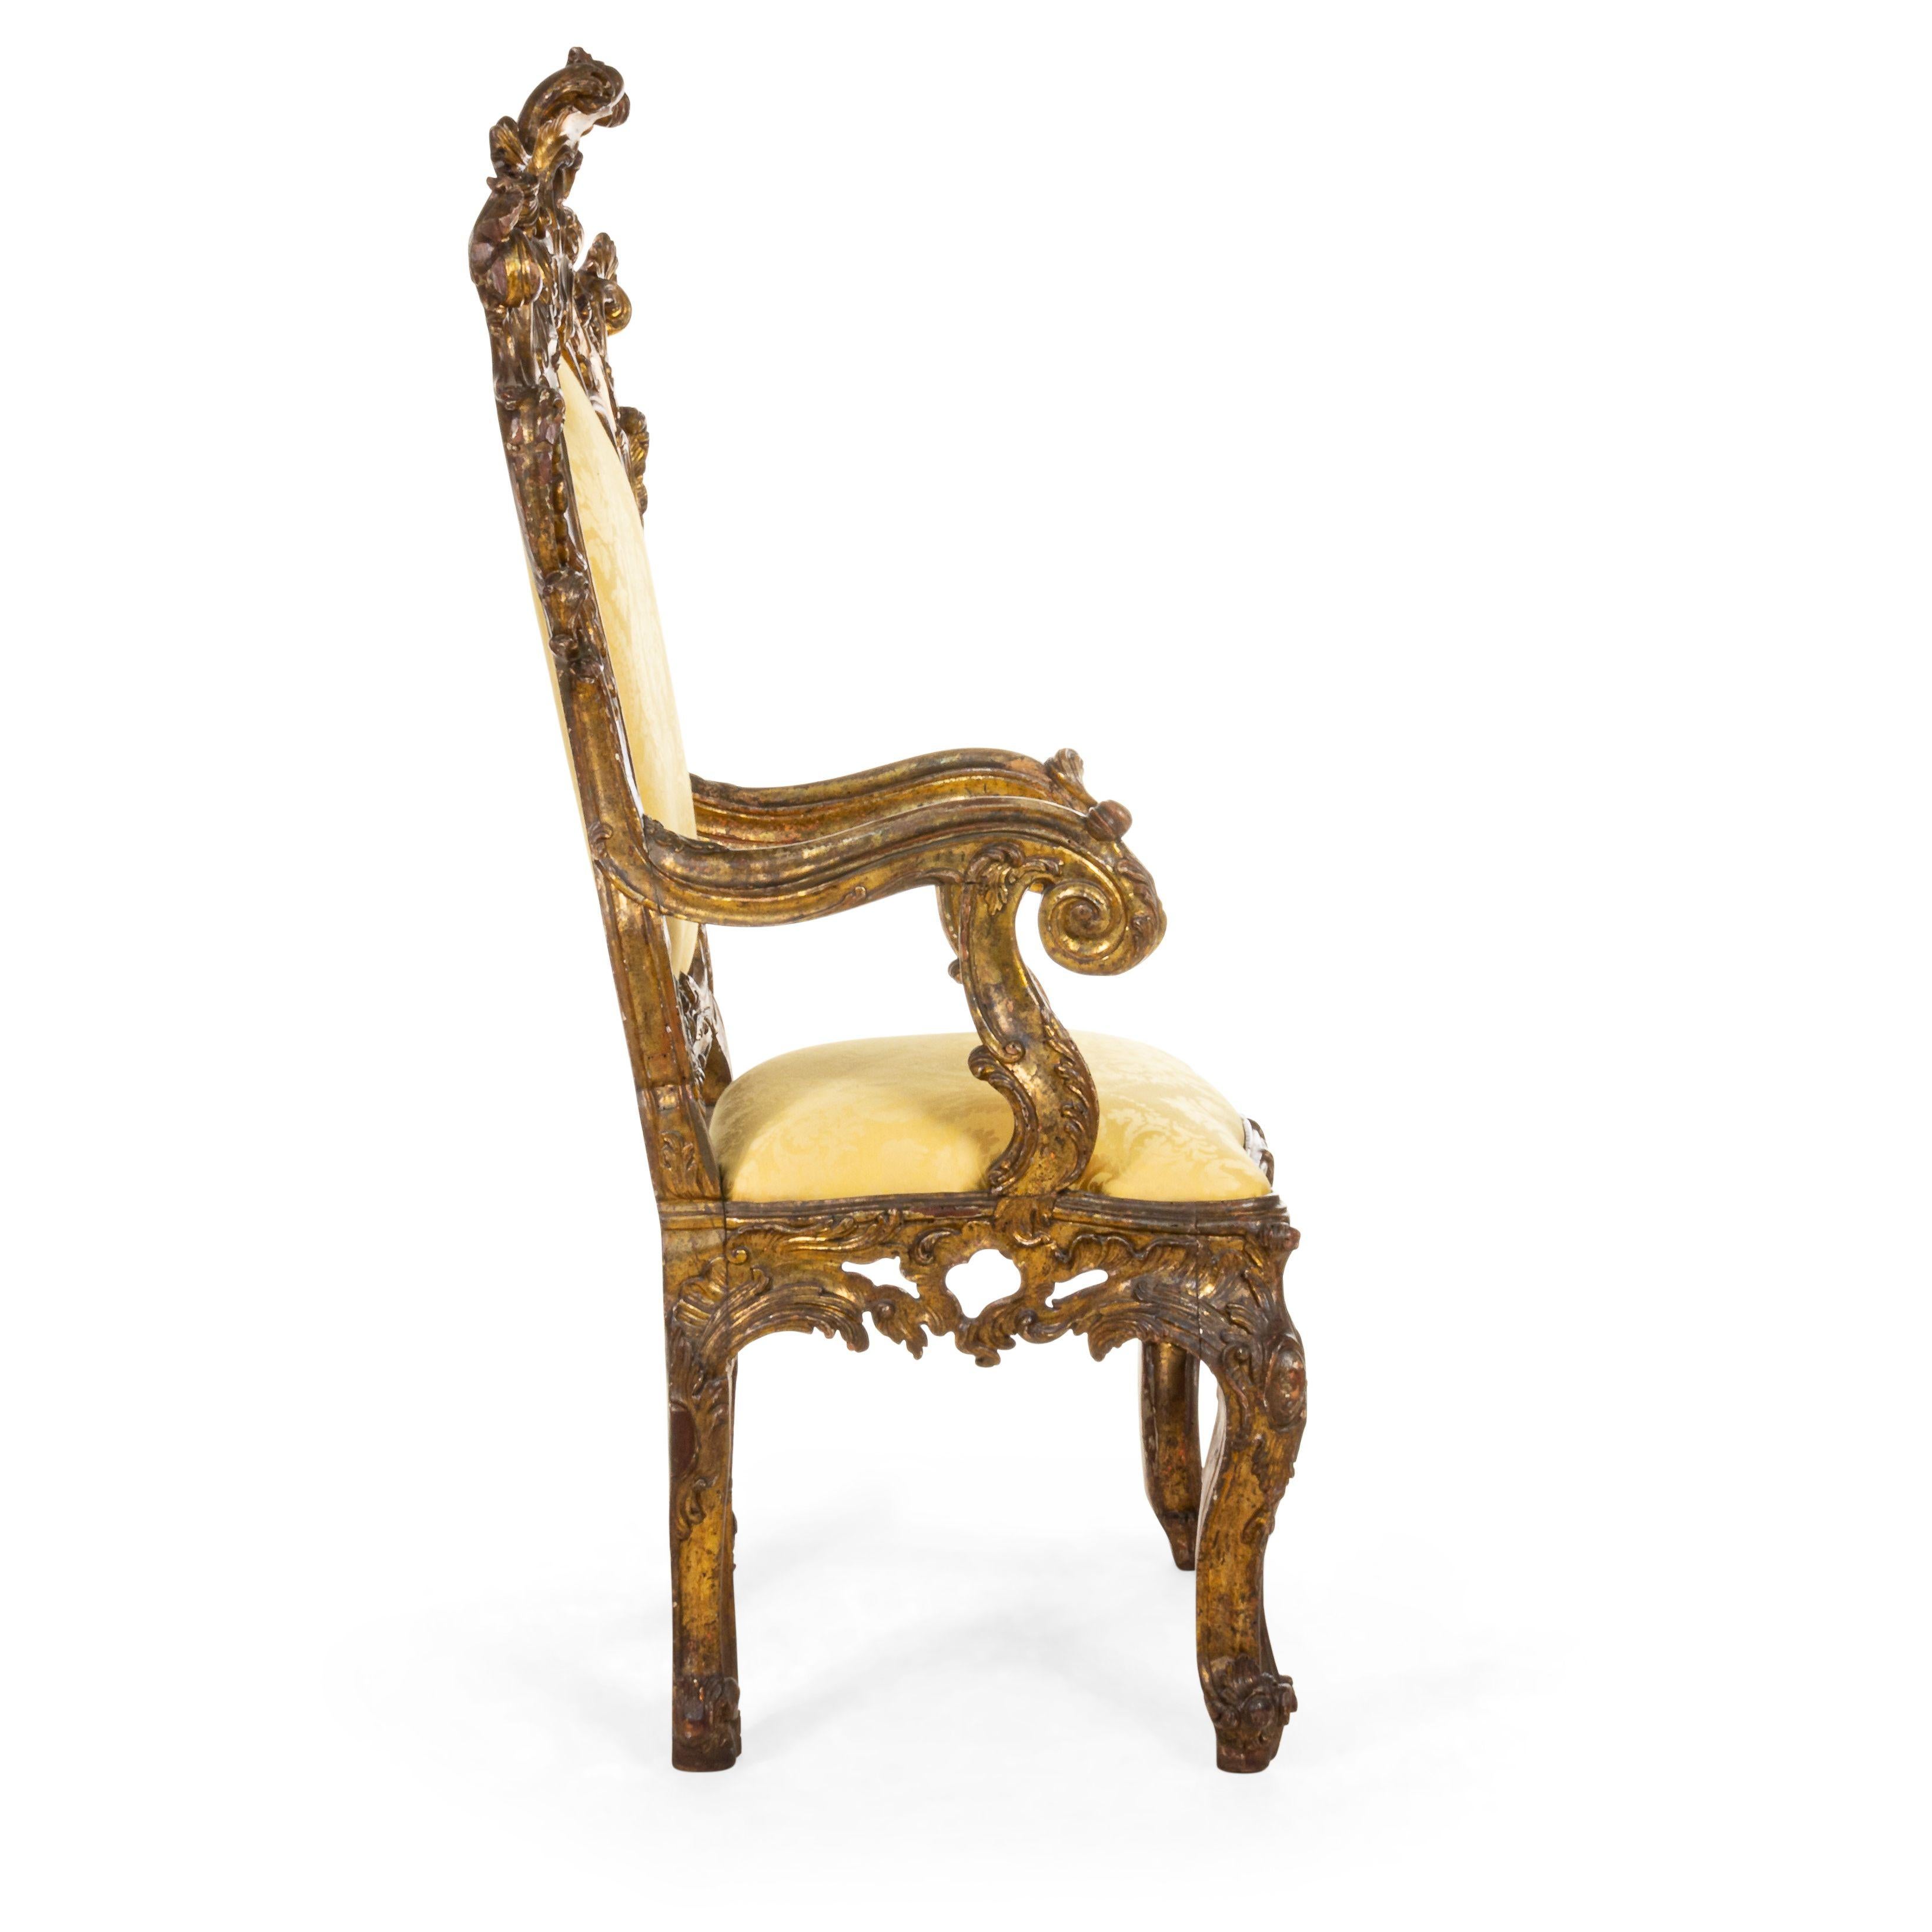 Italian Rococo Gold Damask Throne Chair For Sale 1